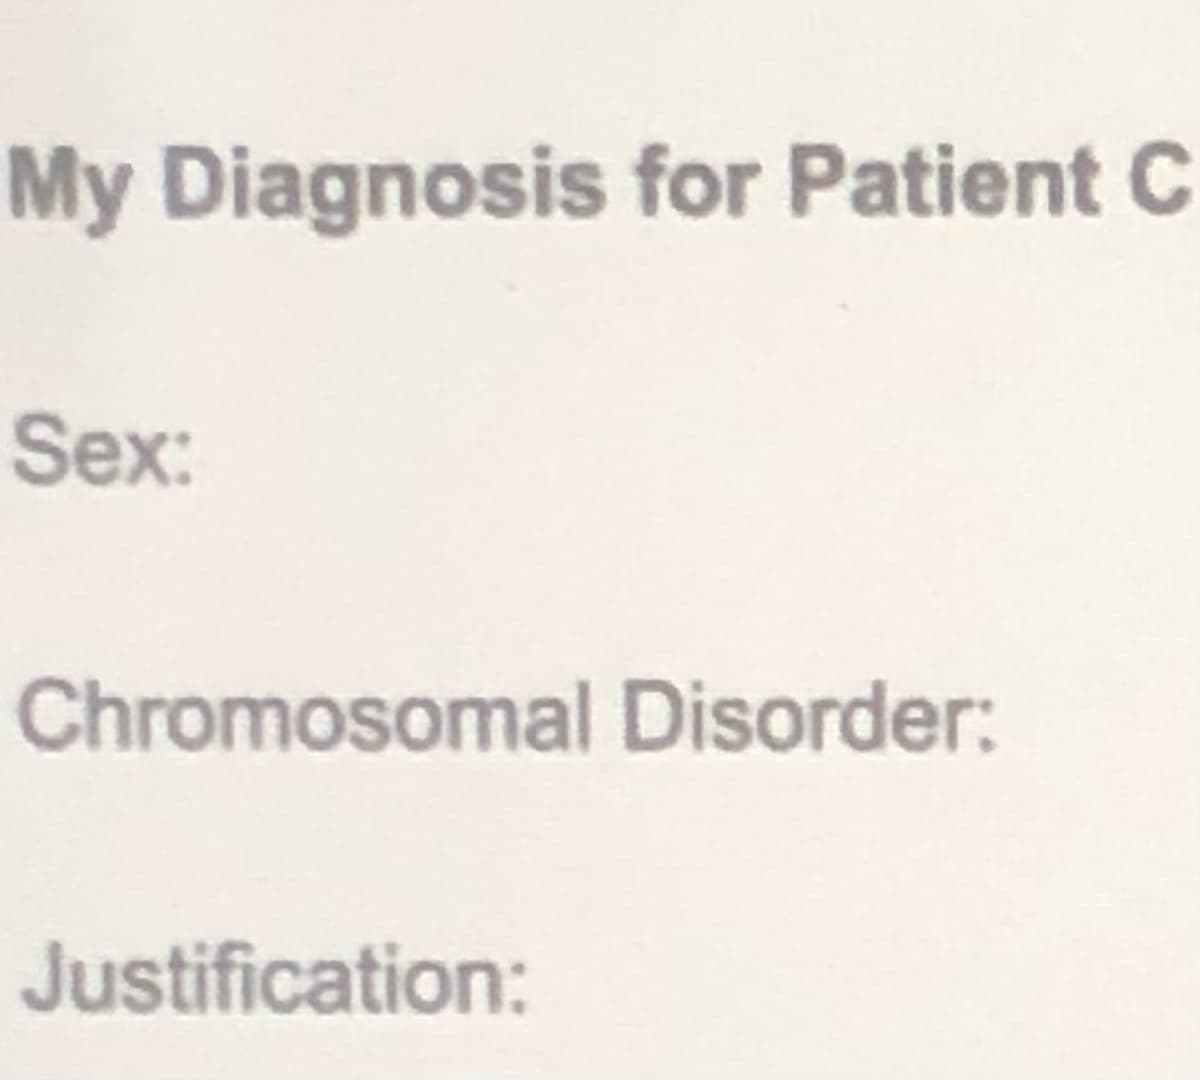 My Diagnosis for Patient C
Sex:
Chromosomal Disorder:
Justification:
